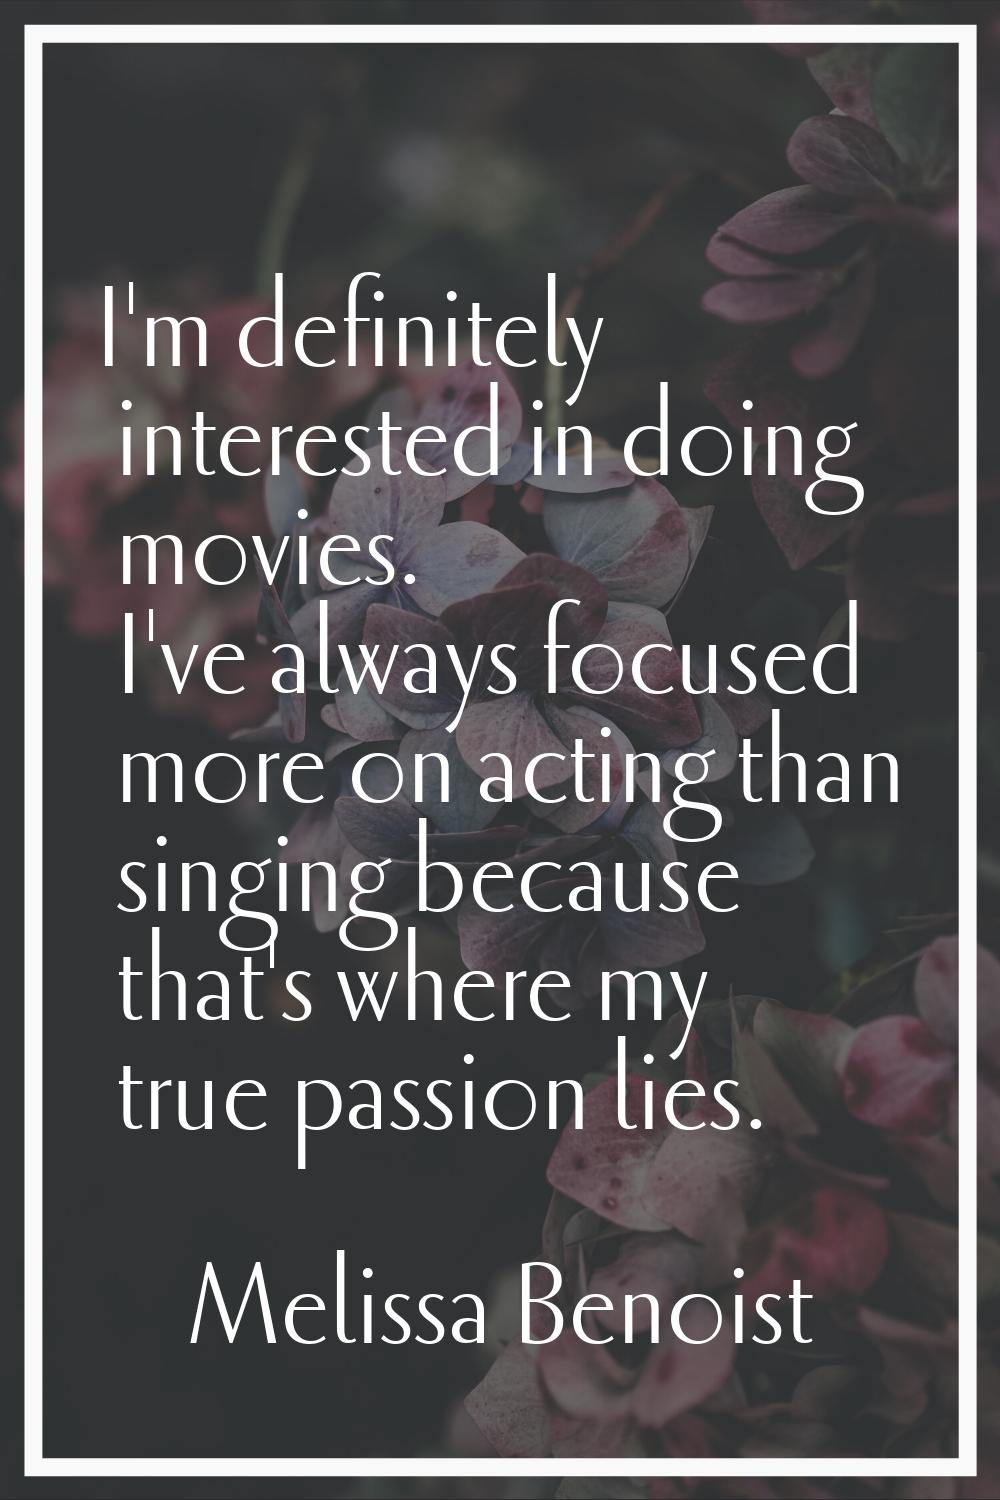 I'm definitely interested in doing movies. I've always focused more on acting than singing because 